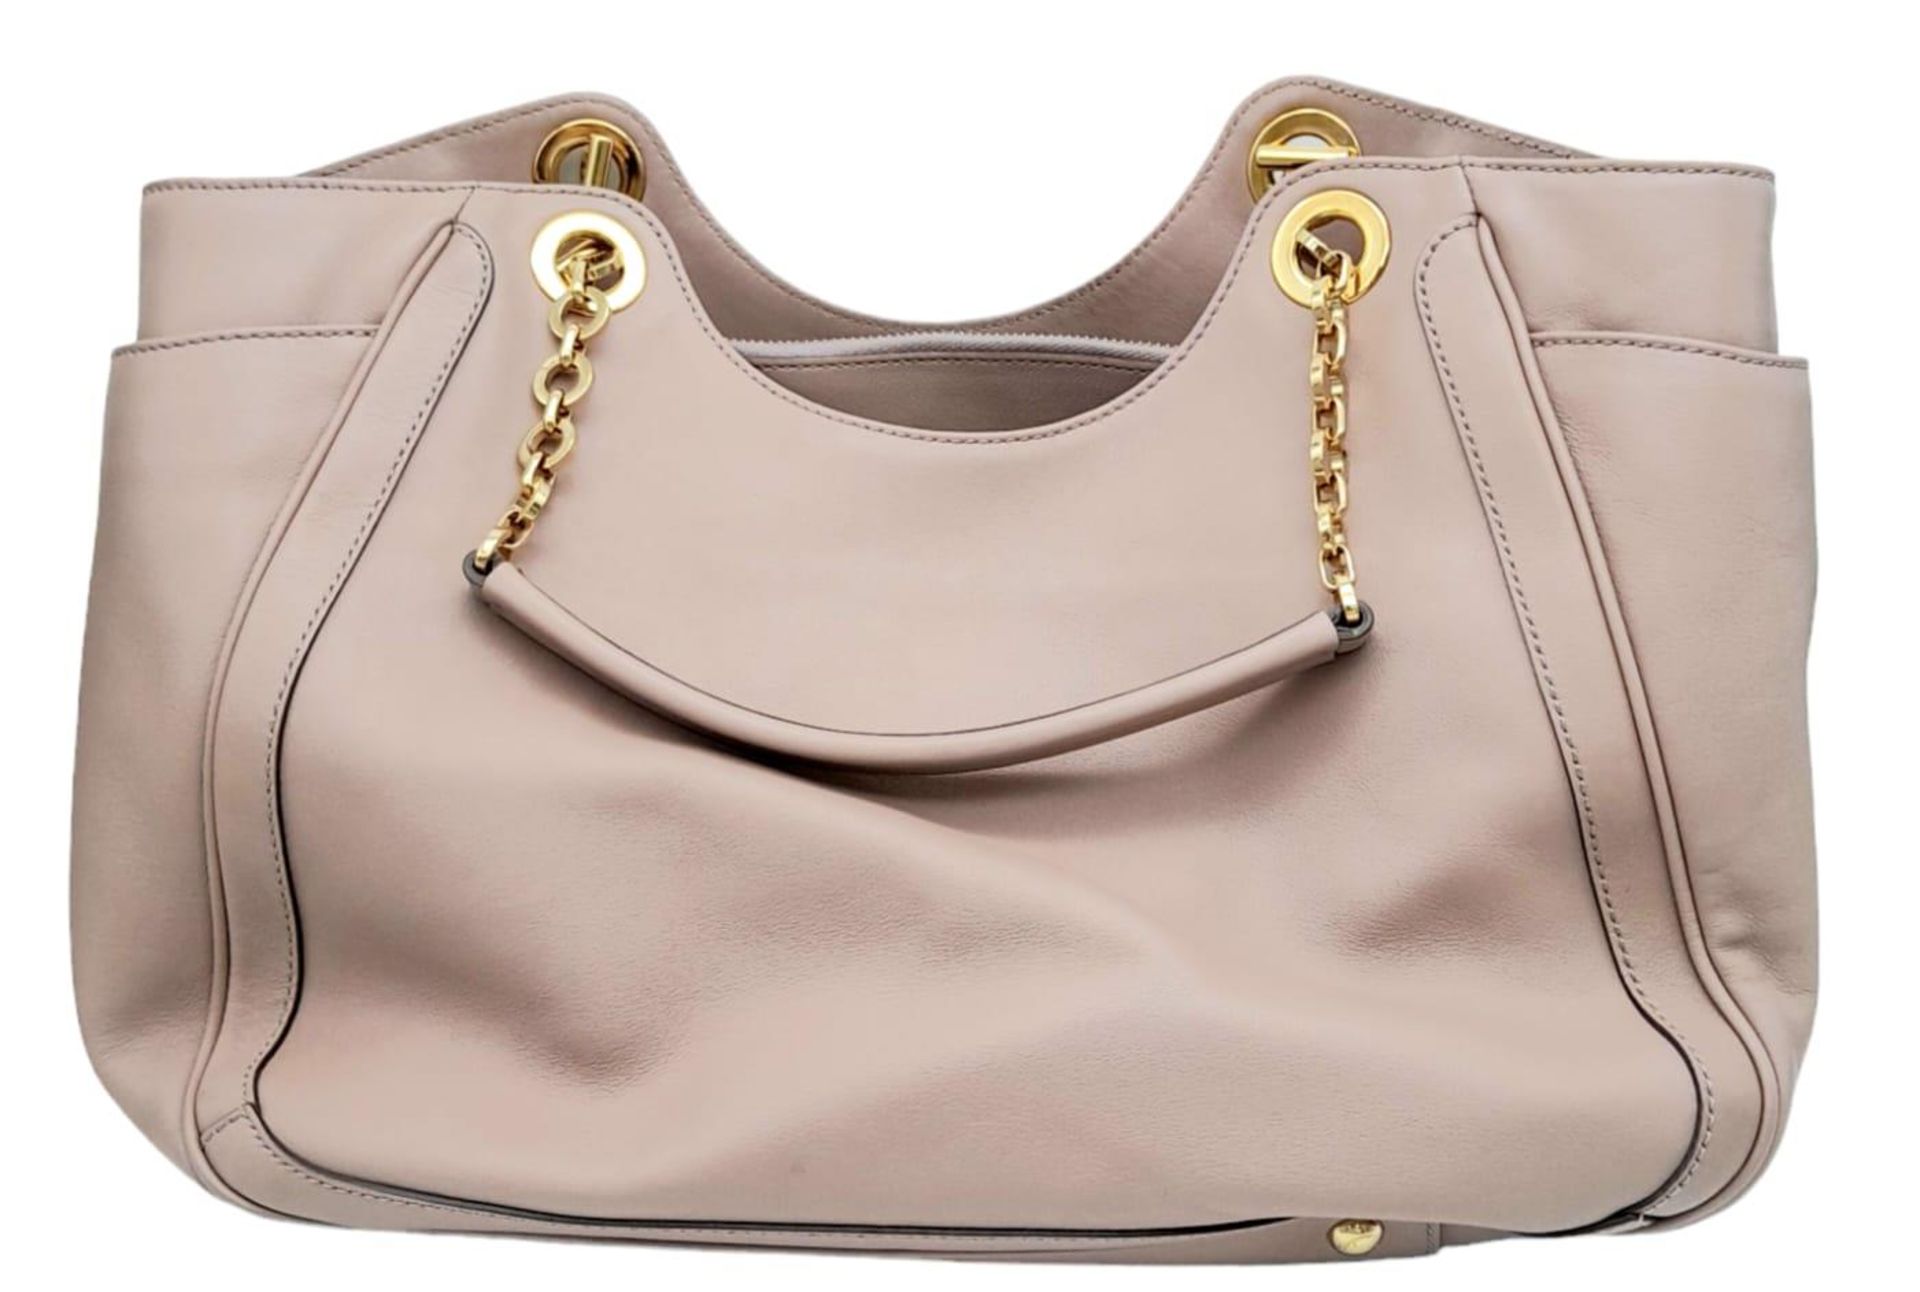 Salvatore Ferragamo Taupe Handbag. Double handle, central zipped compartment, gold tones and - Image 2 of 9